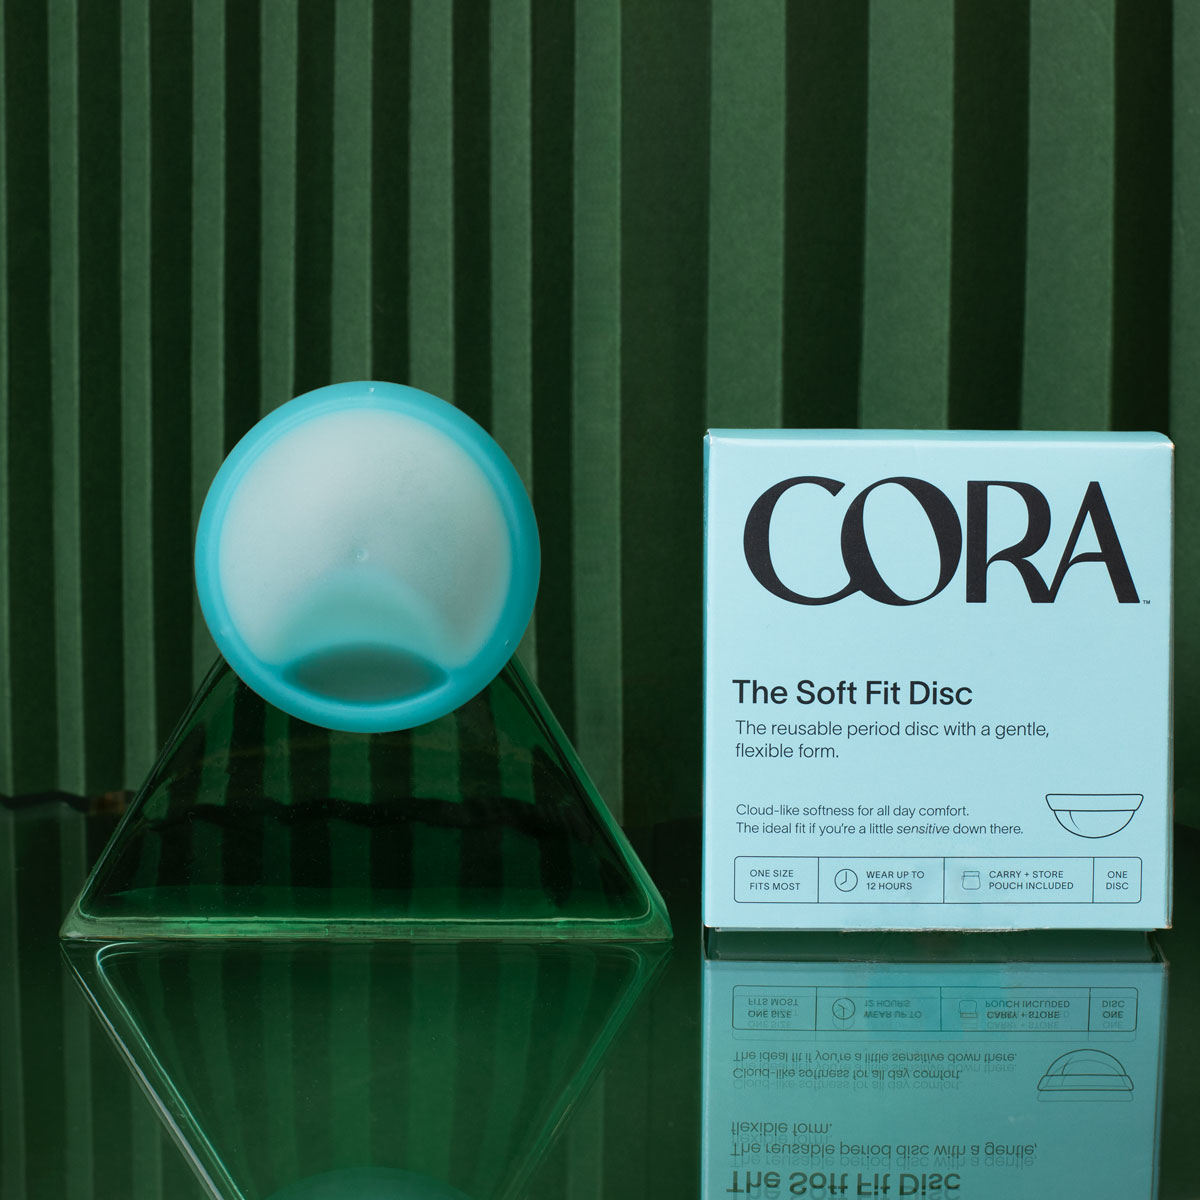  Cora Menstrual Disc, Reusable Period Disc, Wear Up to  12-Hours, Sustainable Alternative to Tampons/Pads, for Light/Heavy Flows, Leak Proof, Medical Grade Silicone